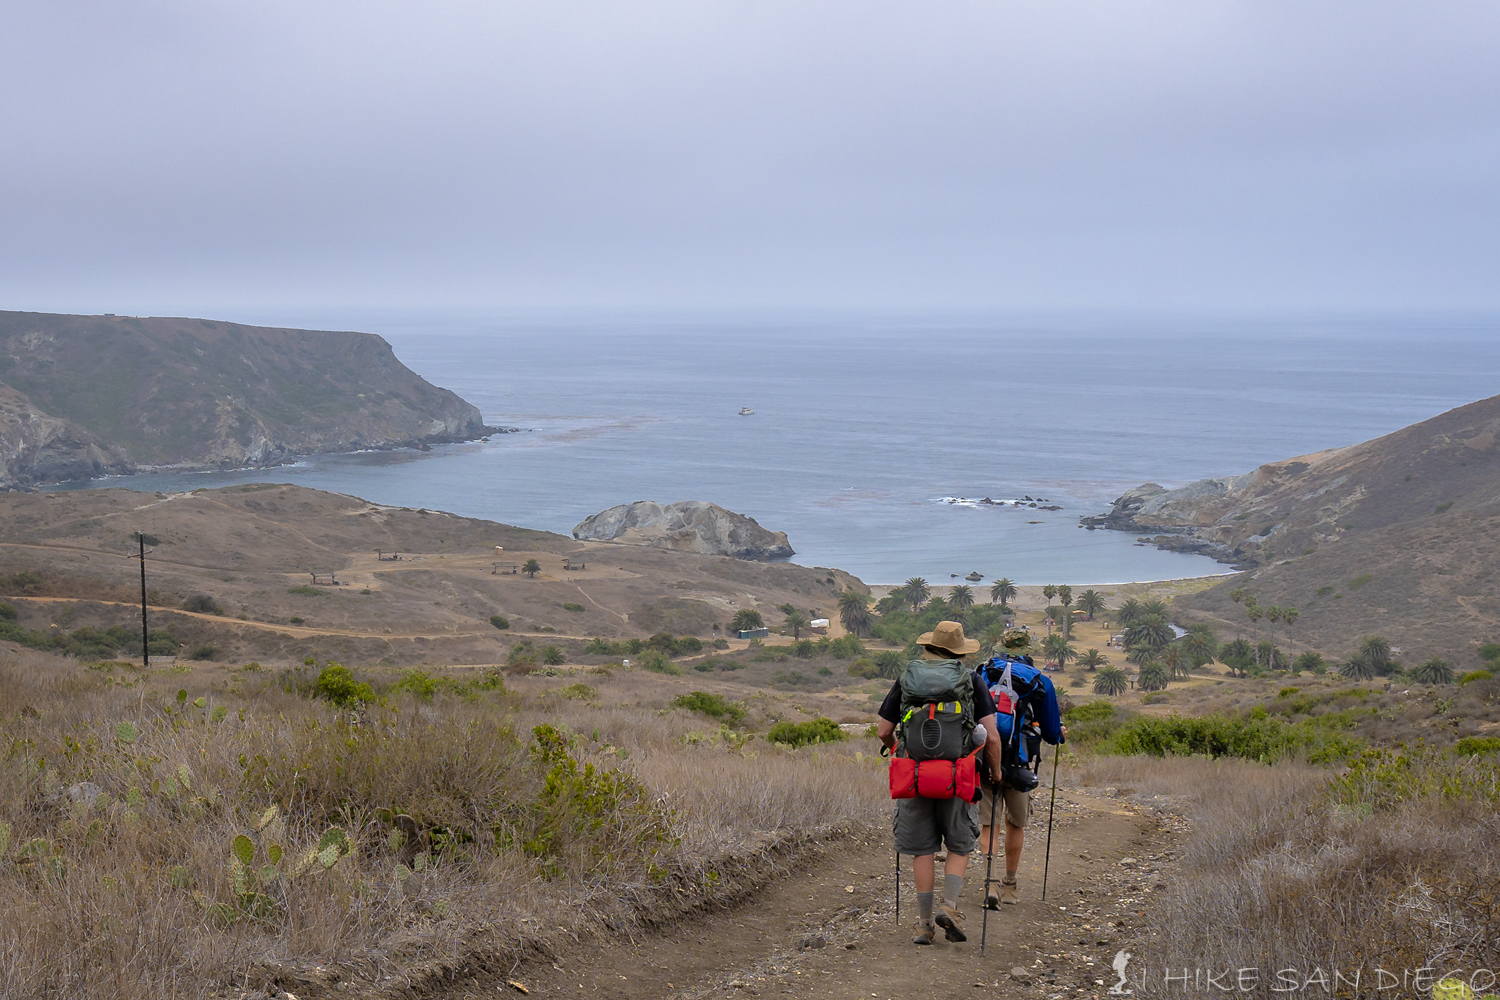 Looking down at the Little Harbor Campsites from the trail